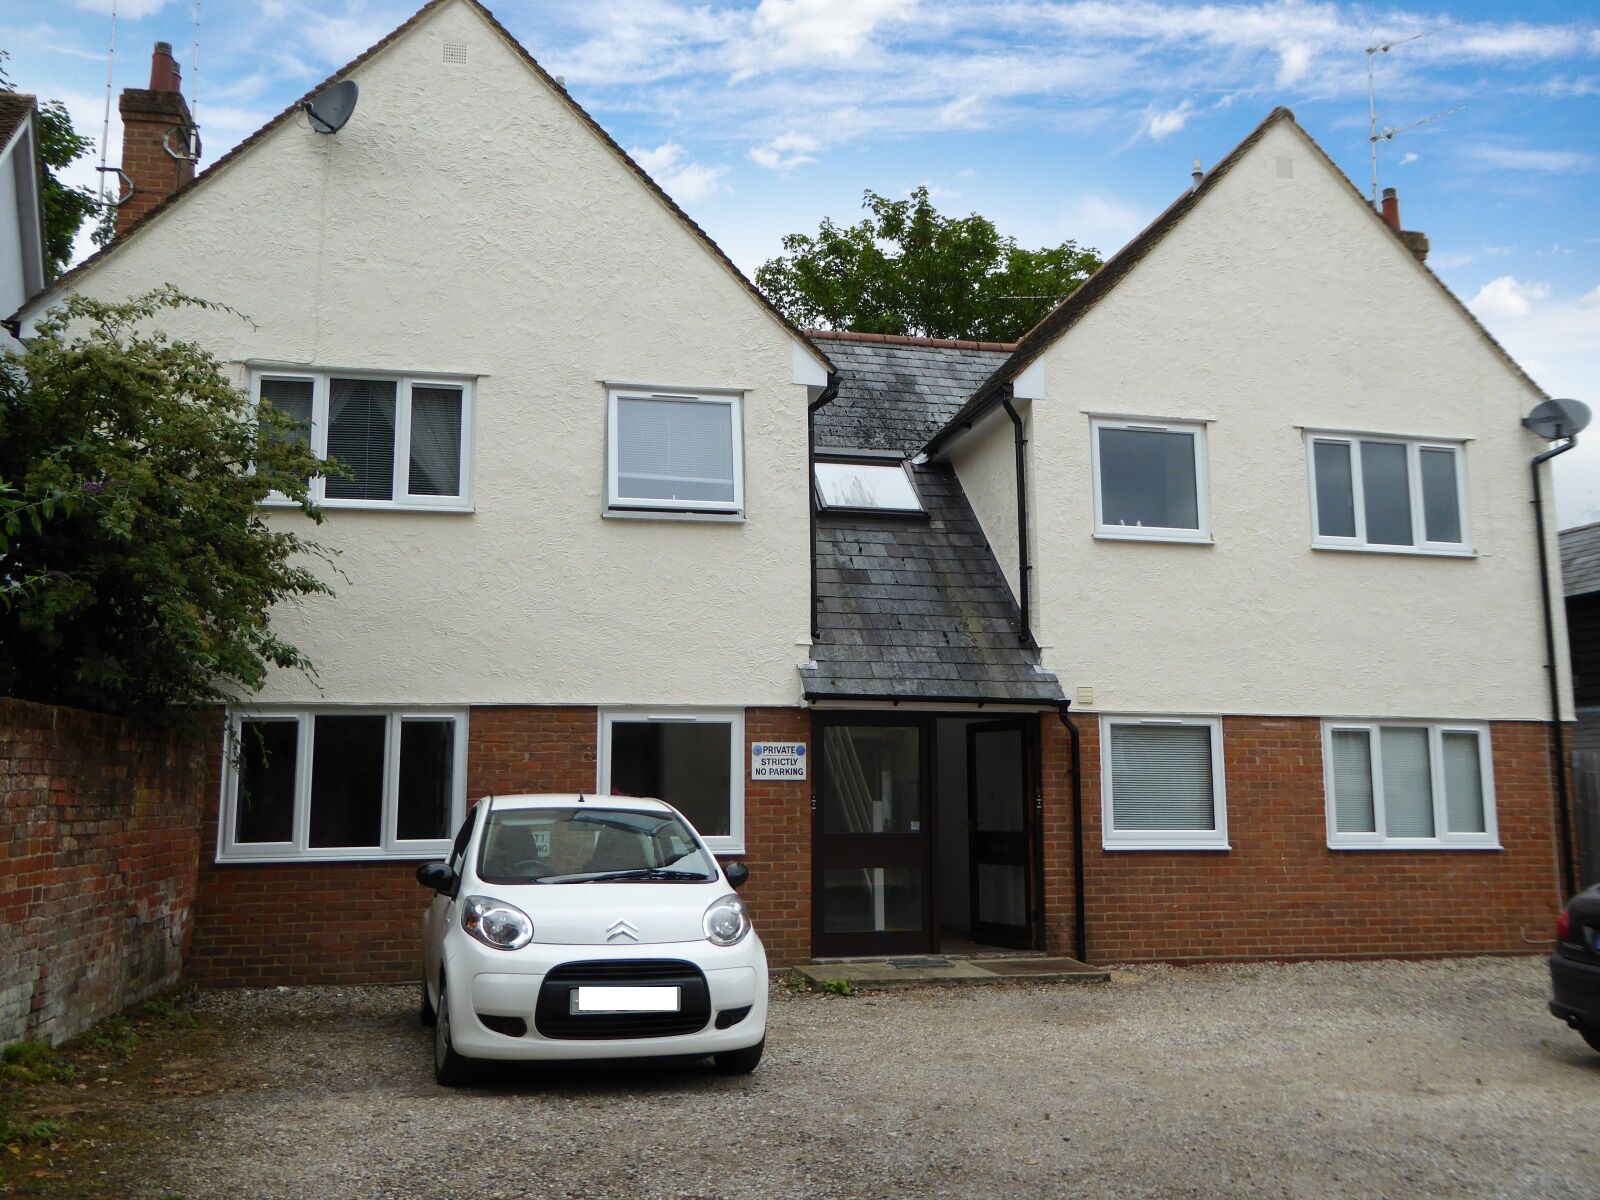 1 bedroom  flat for sale Lewis Court, Great Dunmow, CM6, main image